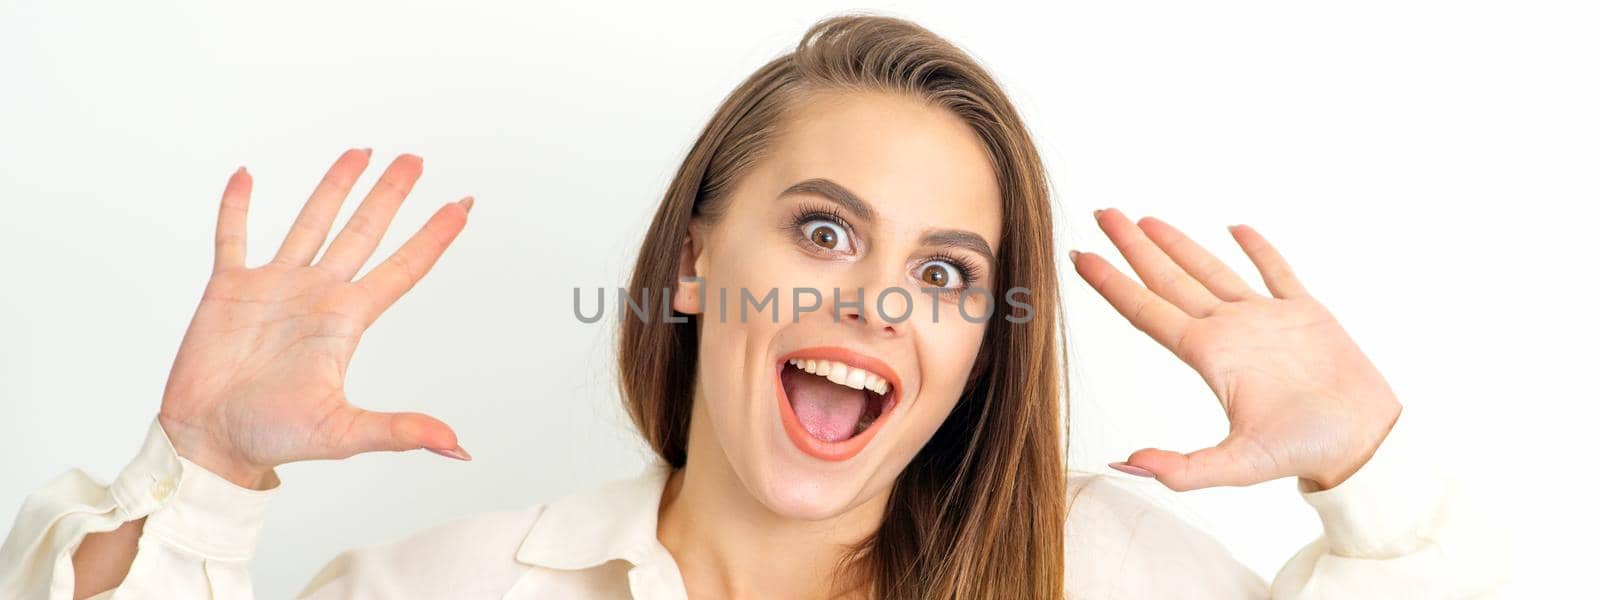 Portrait of young caucasian woman wearing white shirt raises hands and laughs positively with open mouth poses against a white background. by okskukuruza